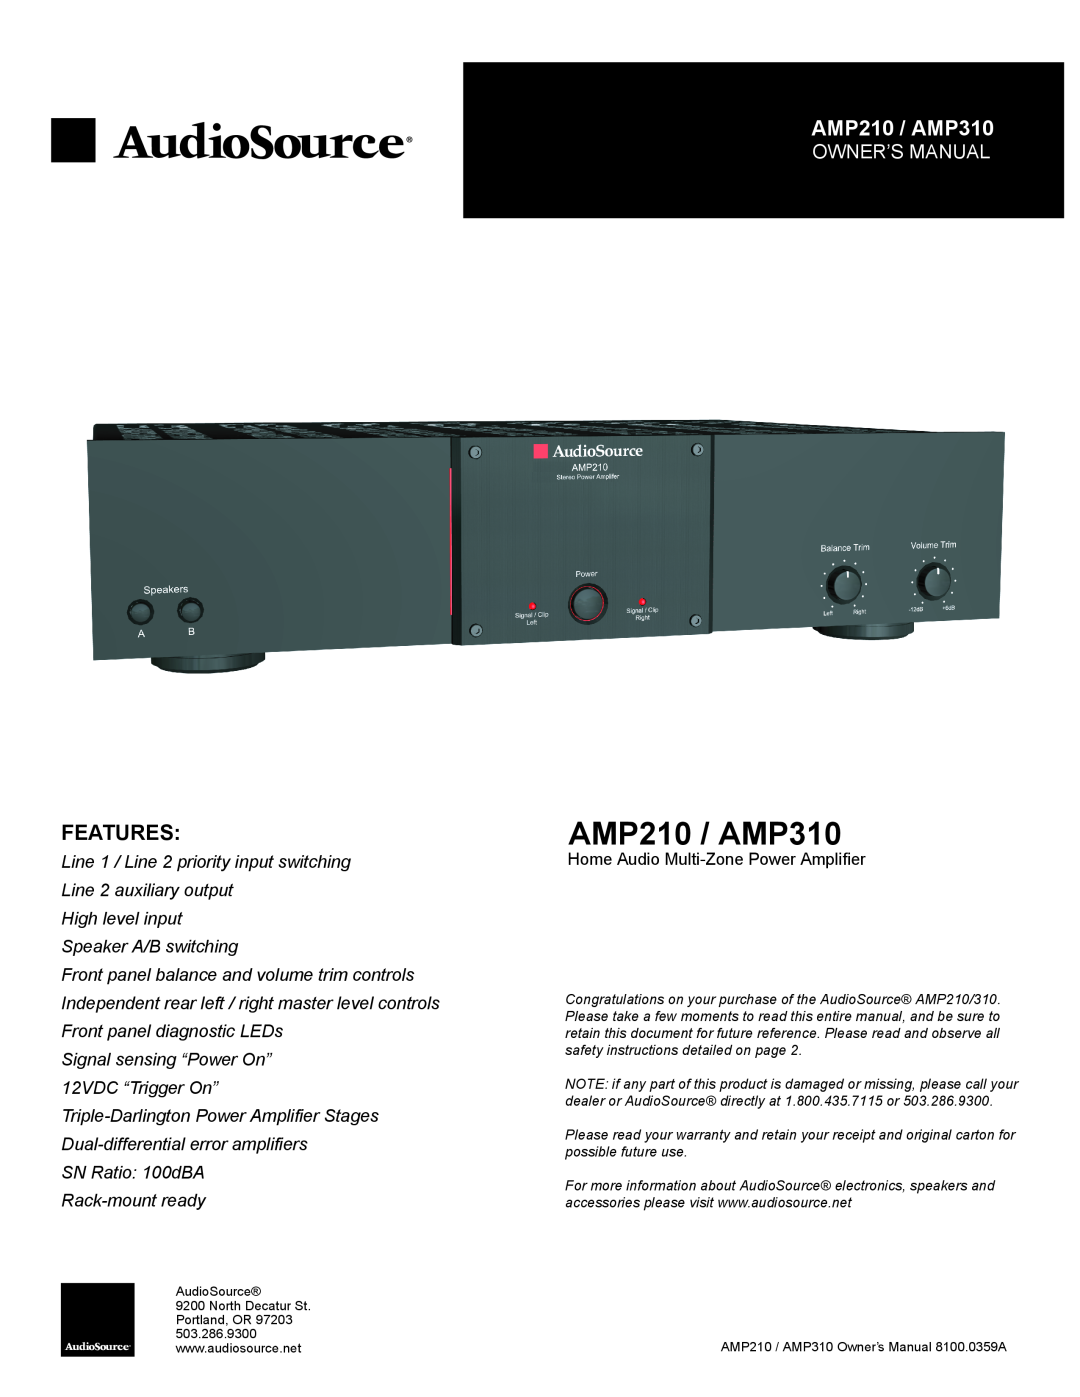 AudioSource AMP210 / AMP310 owner manual Features 